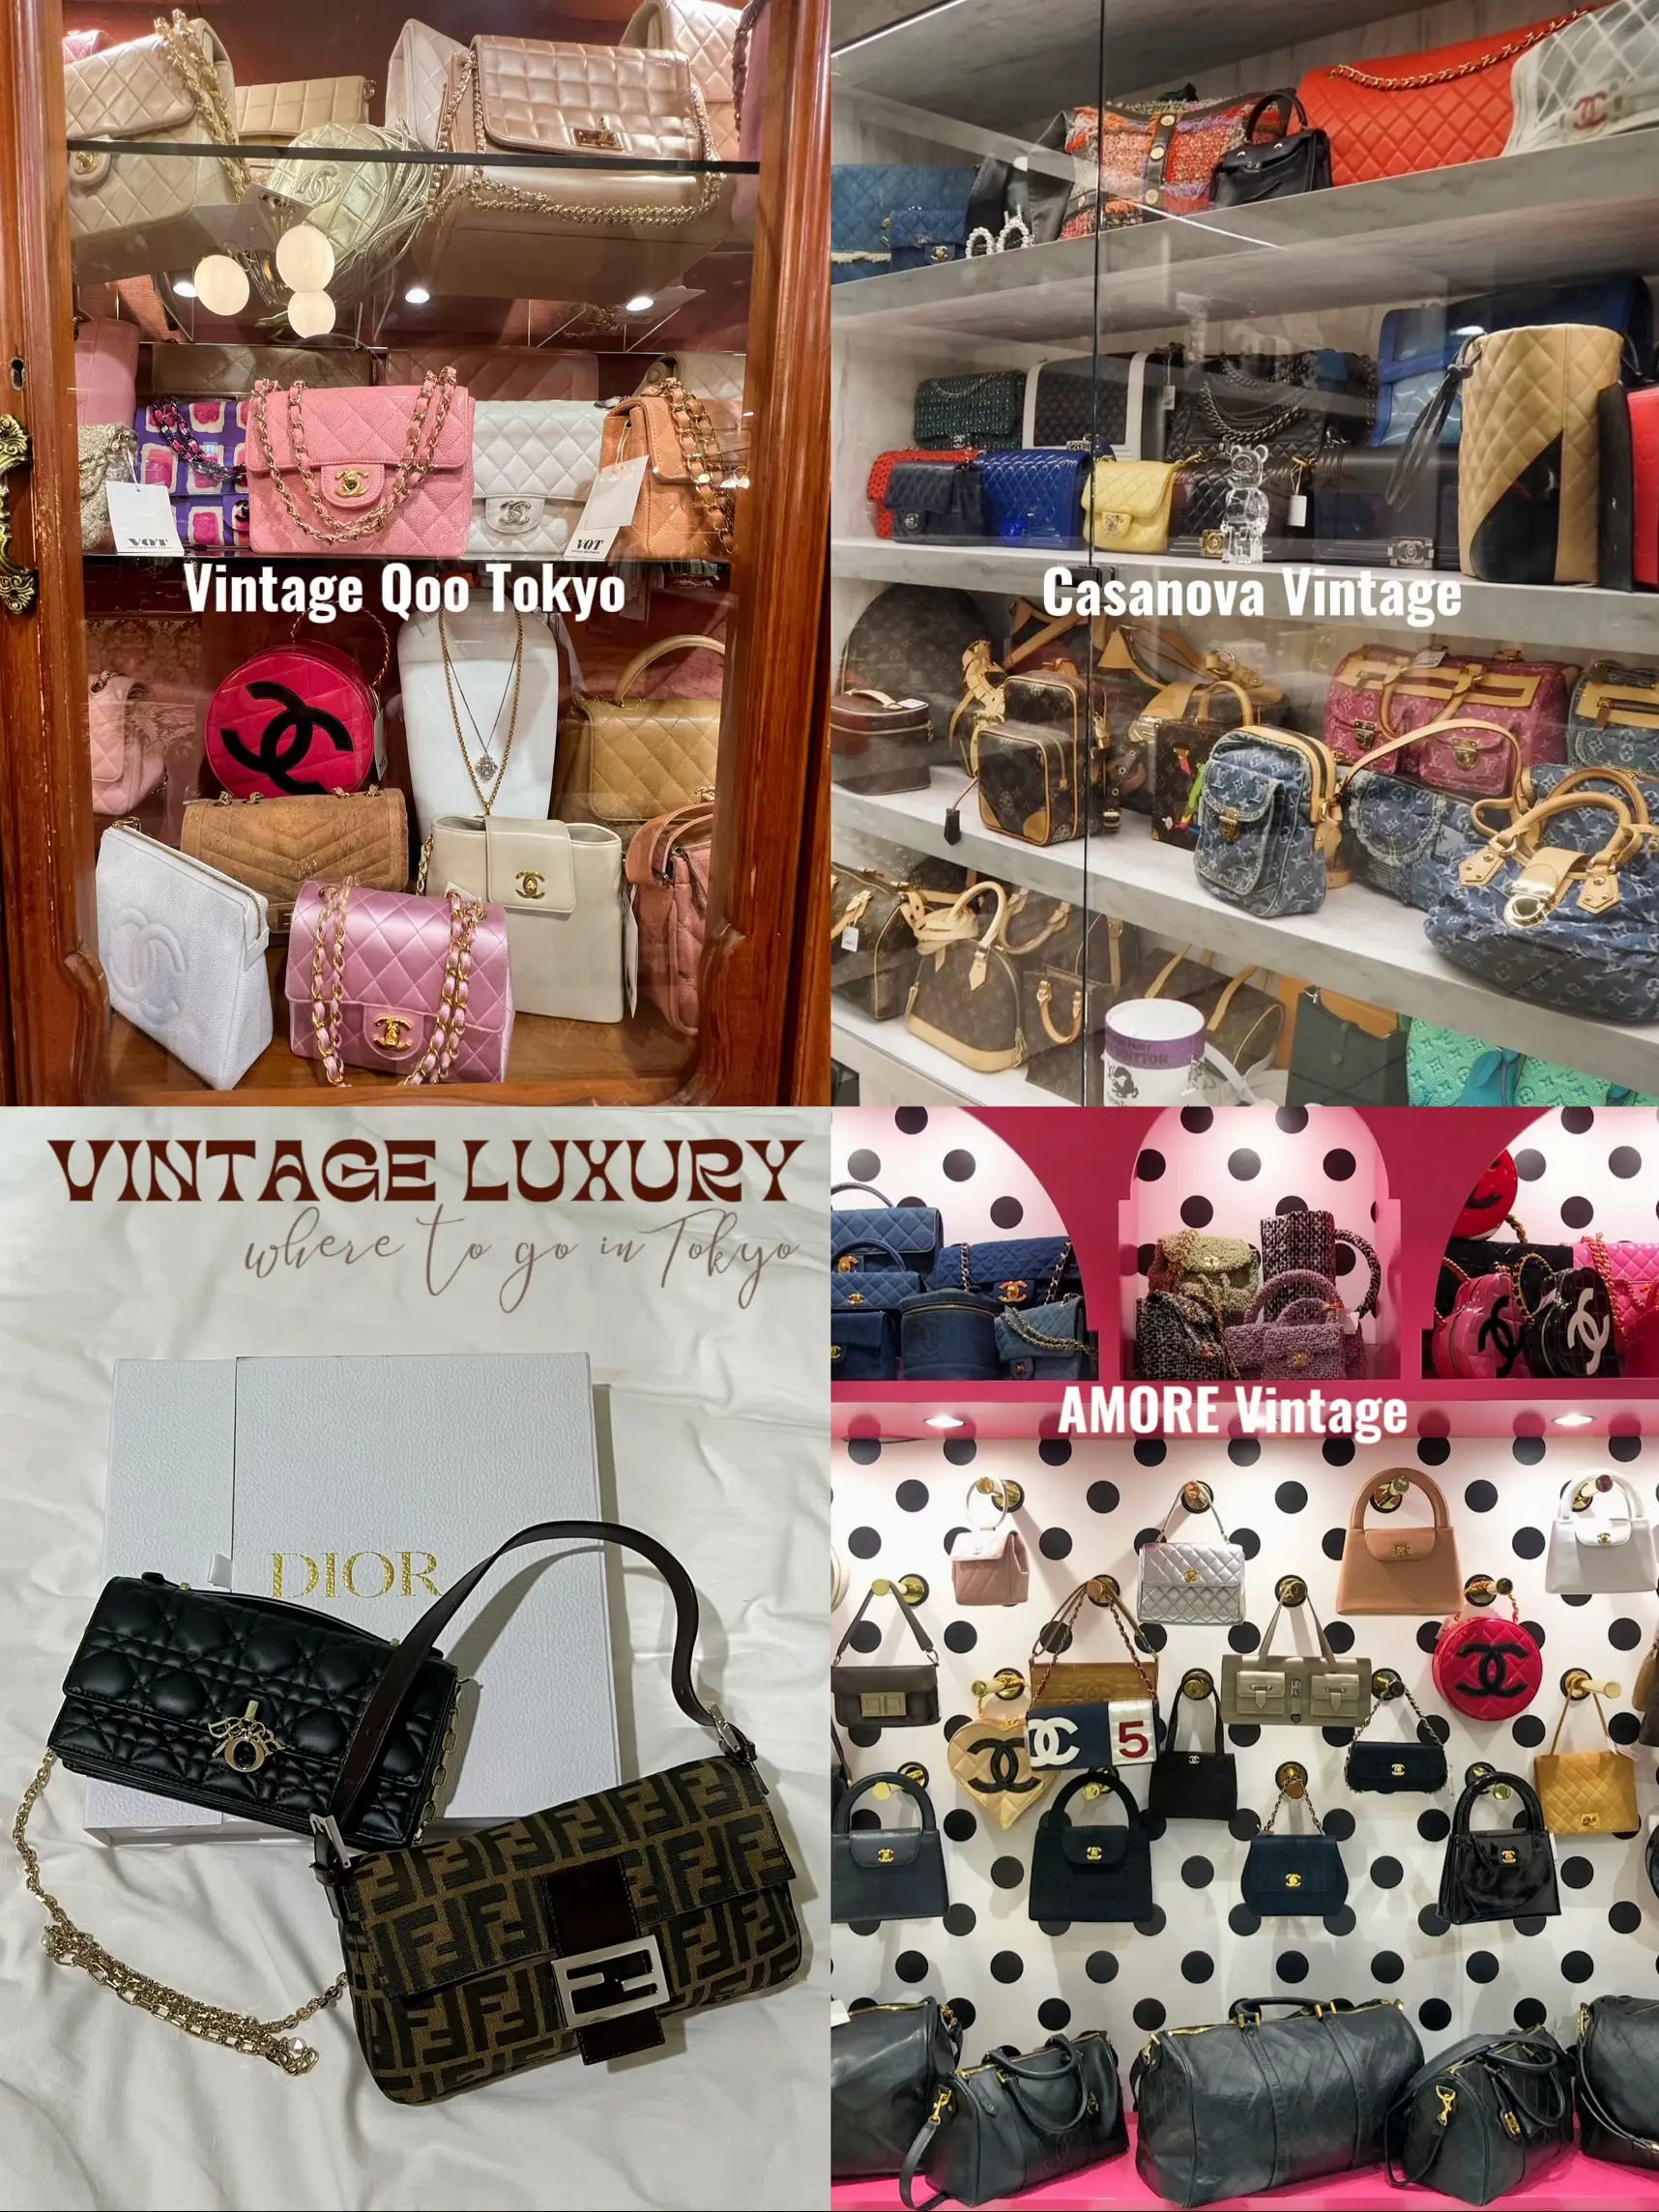 🇯🇵Where to go in Tokyo to shop for vintage luxury🛍️